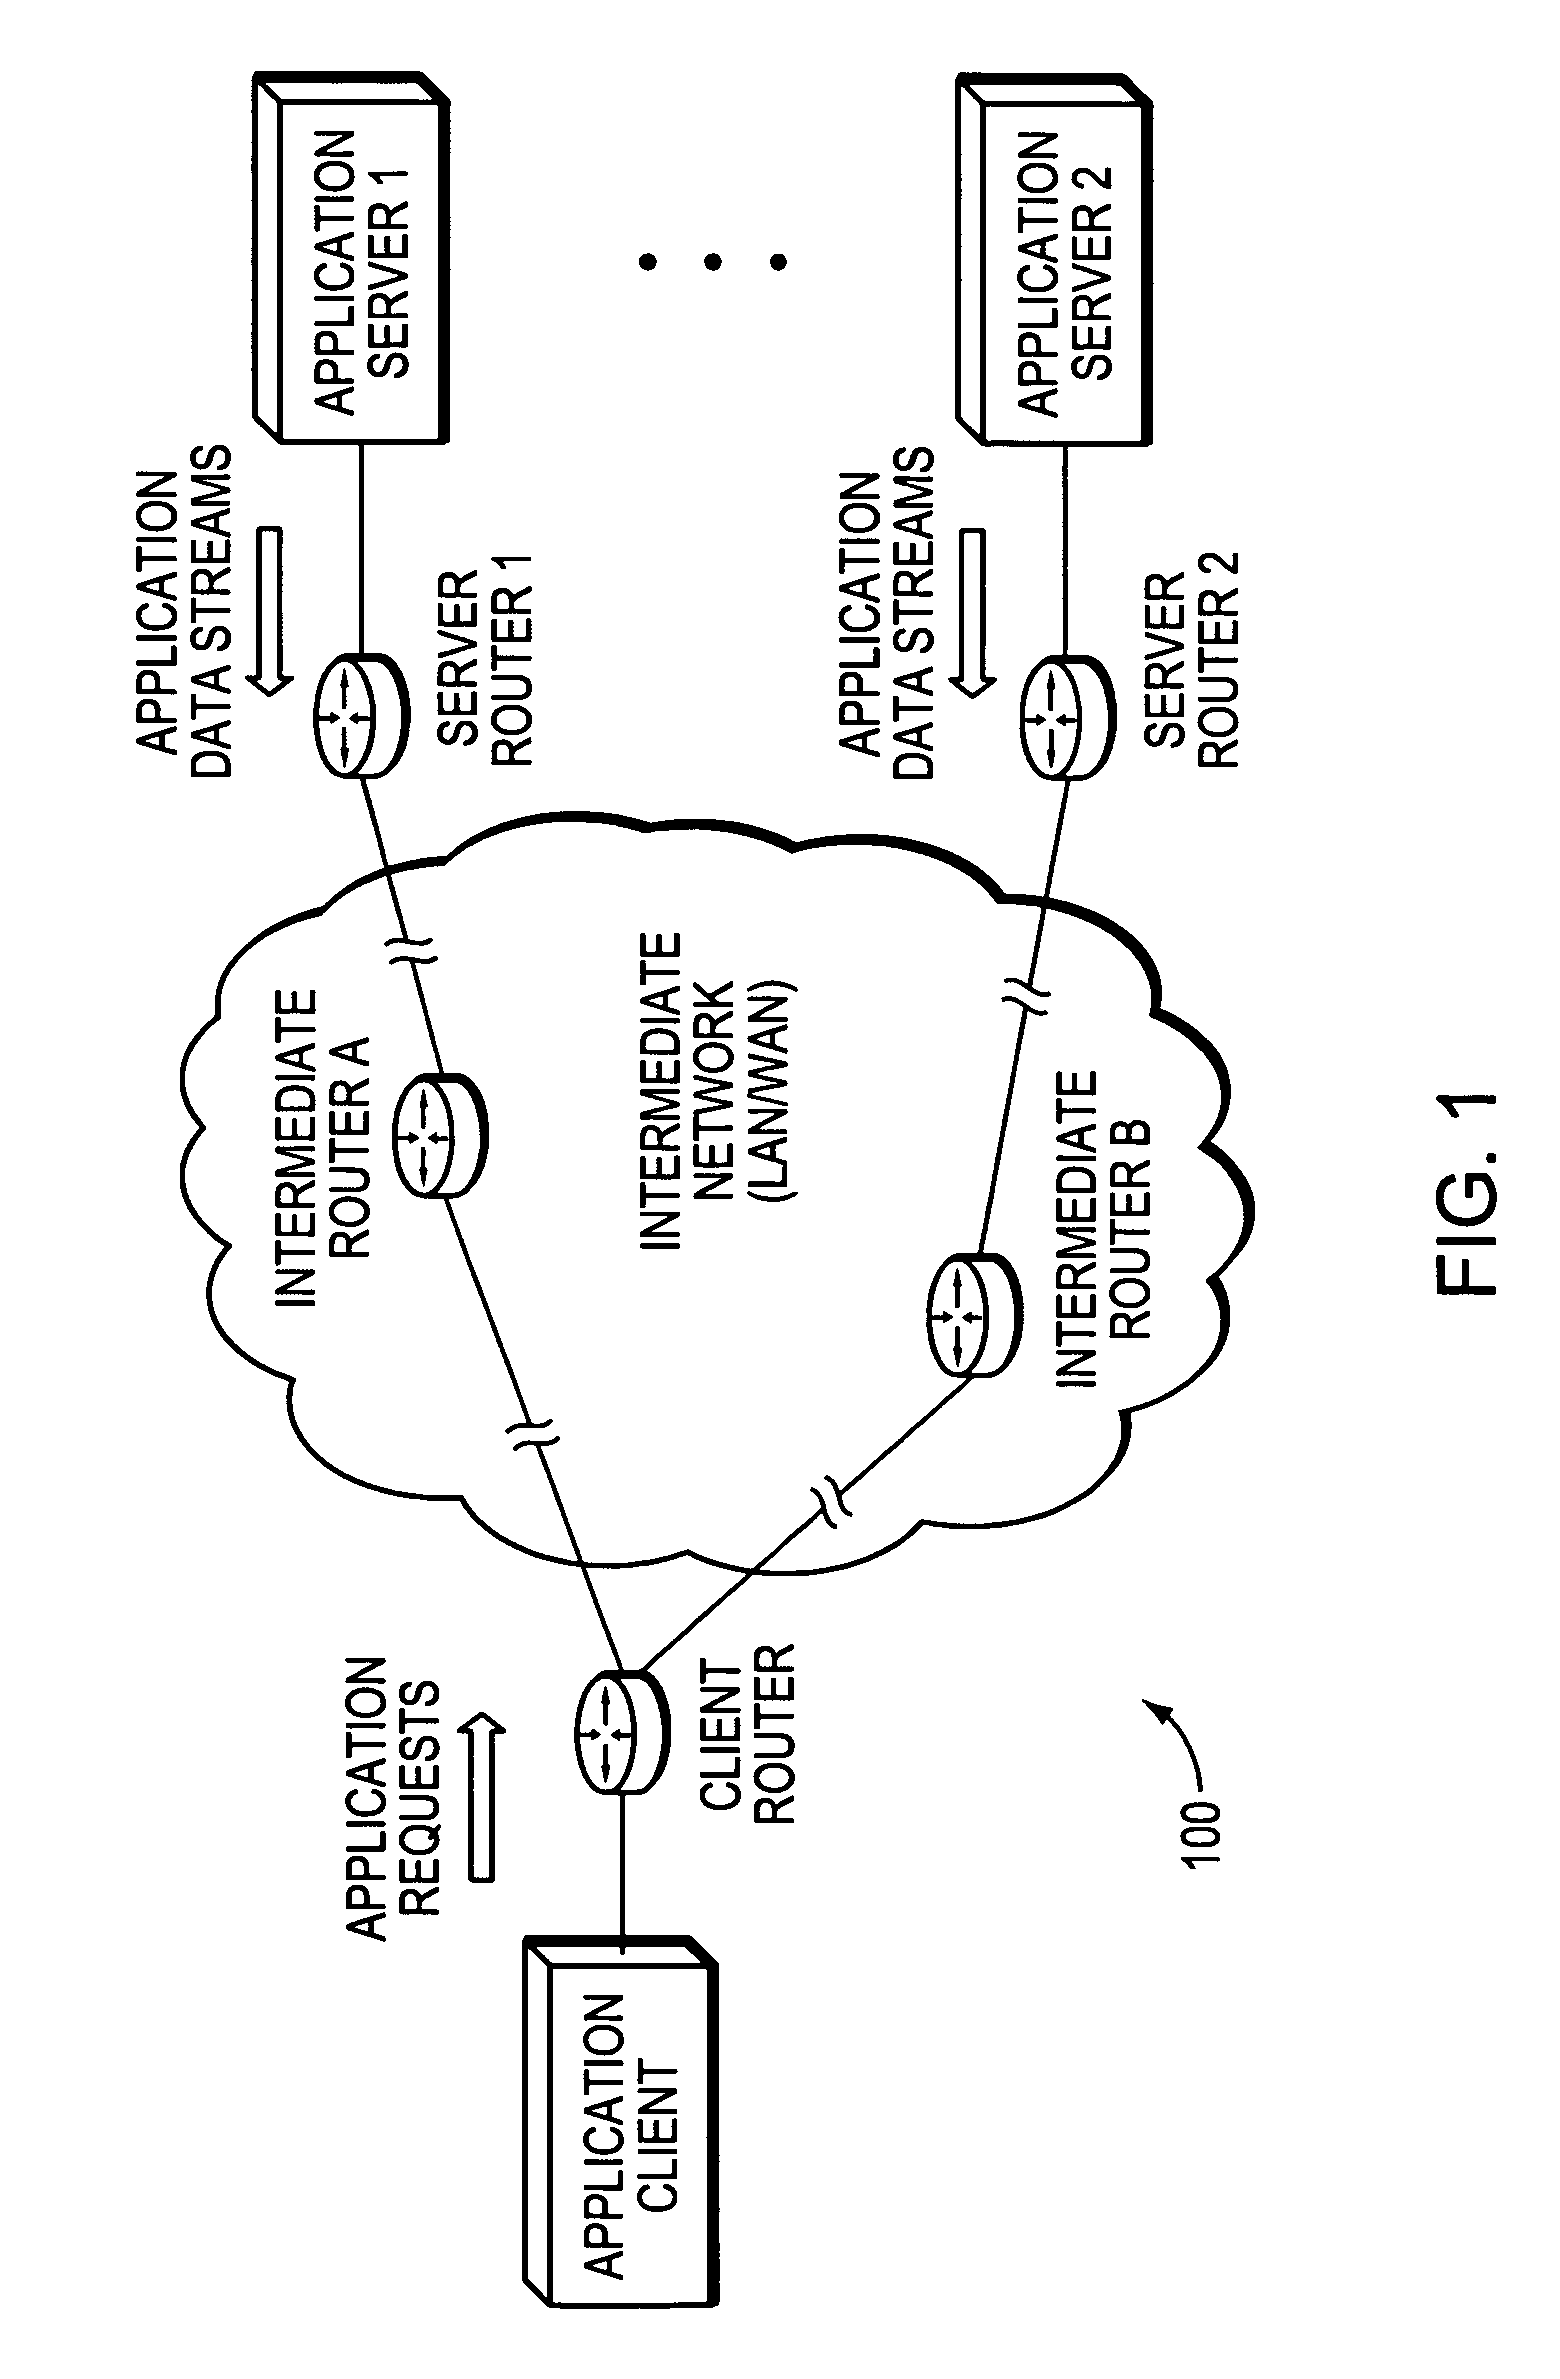 Technique for optimized routing of data streams on an IP backbone in a computer network